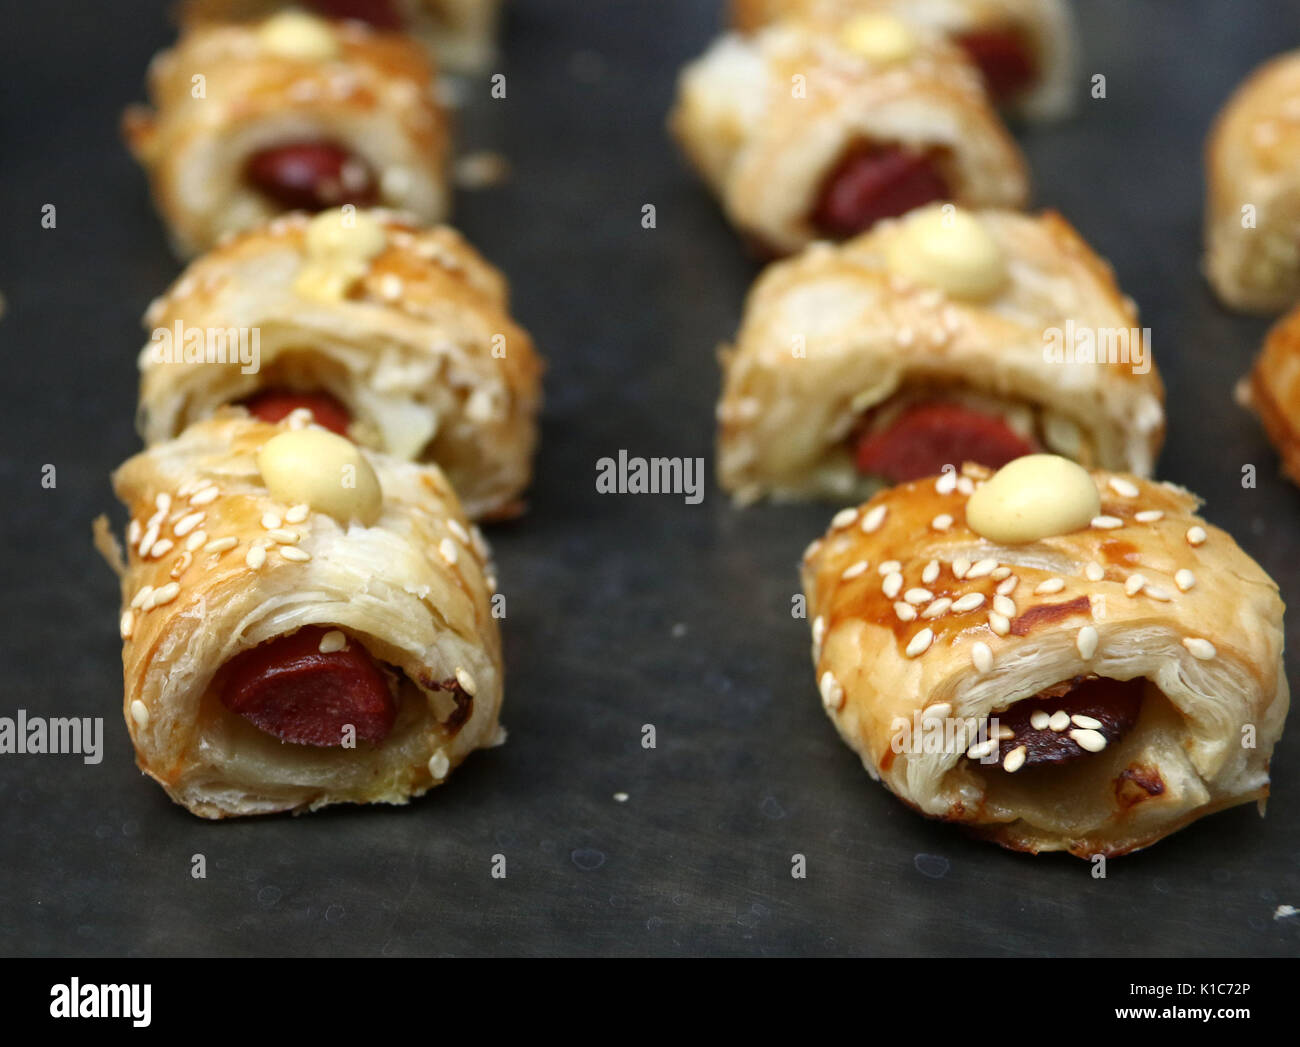 Pigs in a blanket hors d'oeuvres with mustard droplet Stock Photo